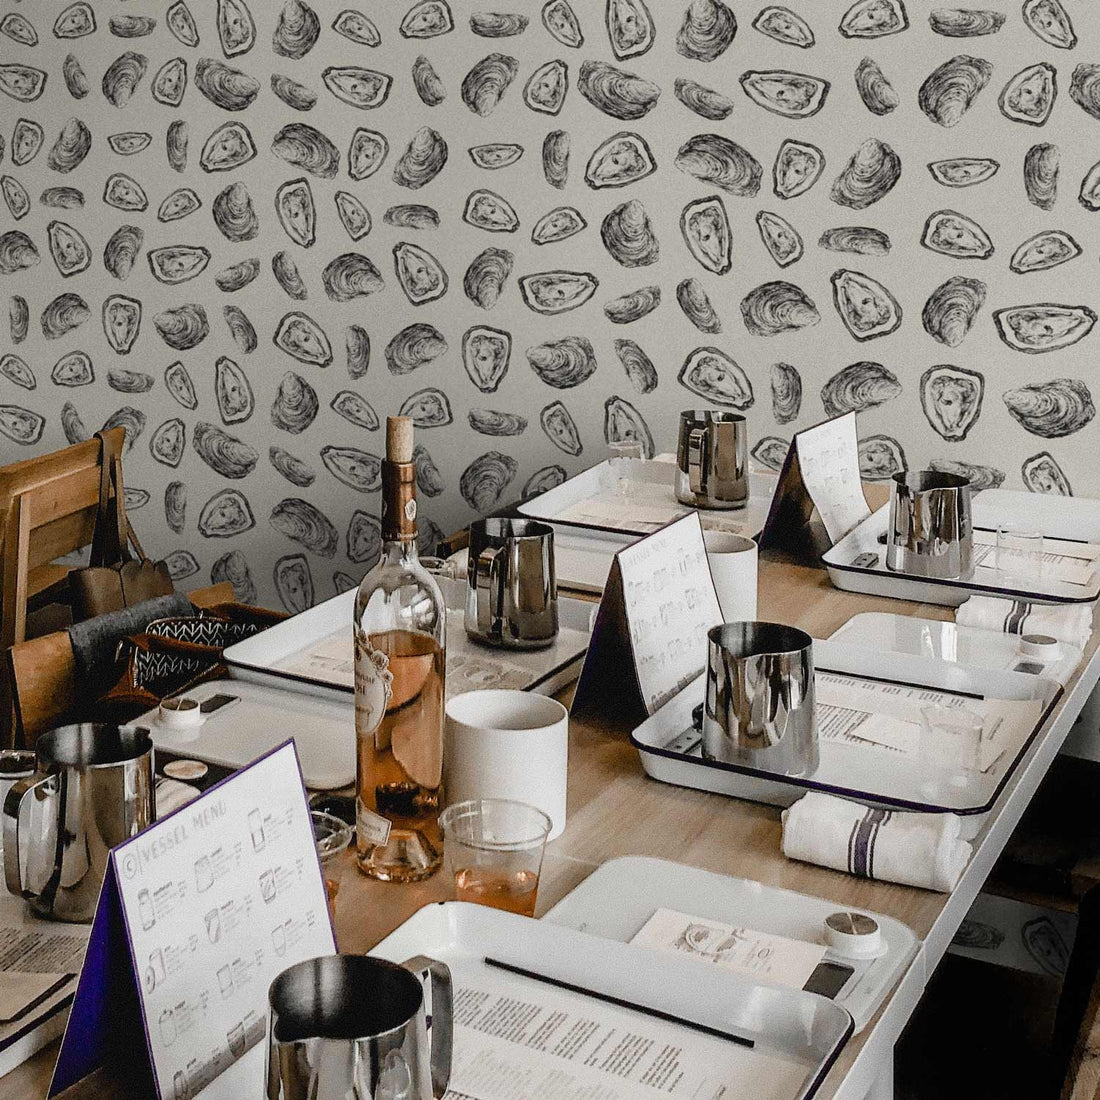 gourmet food inspired wallpaper with oysters for restaurant interior